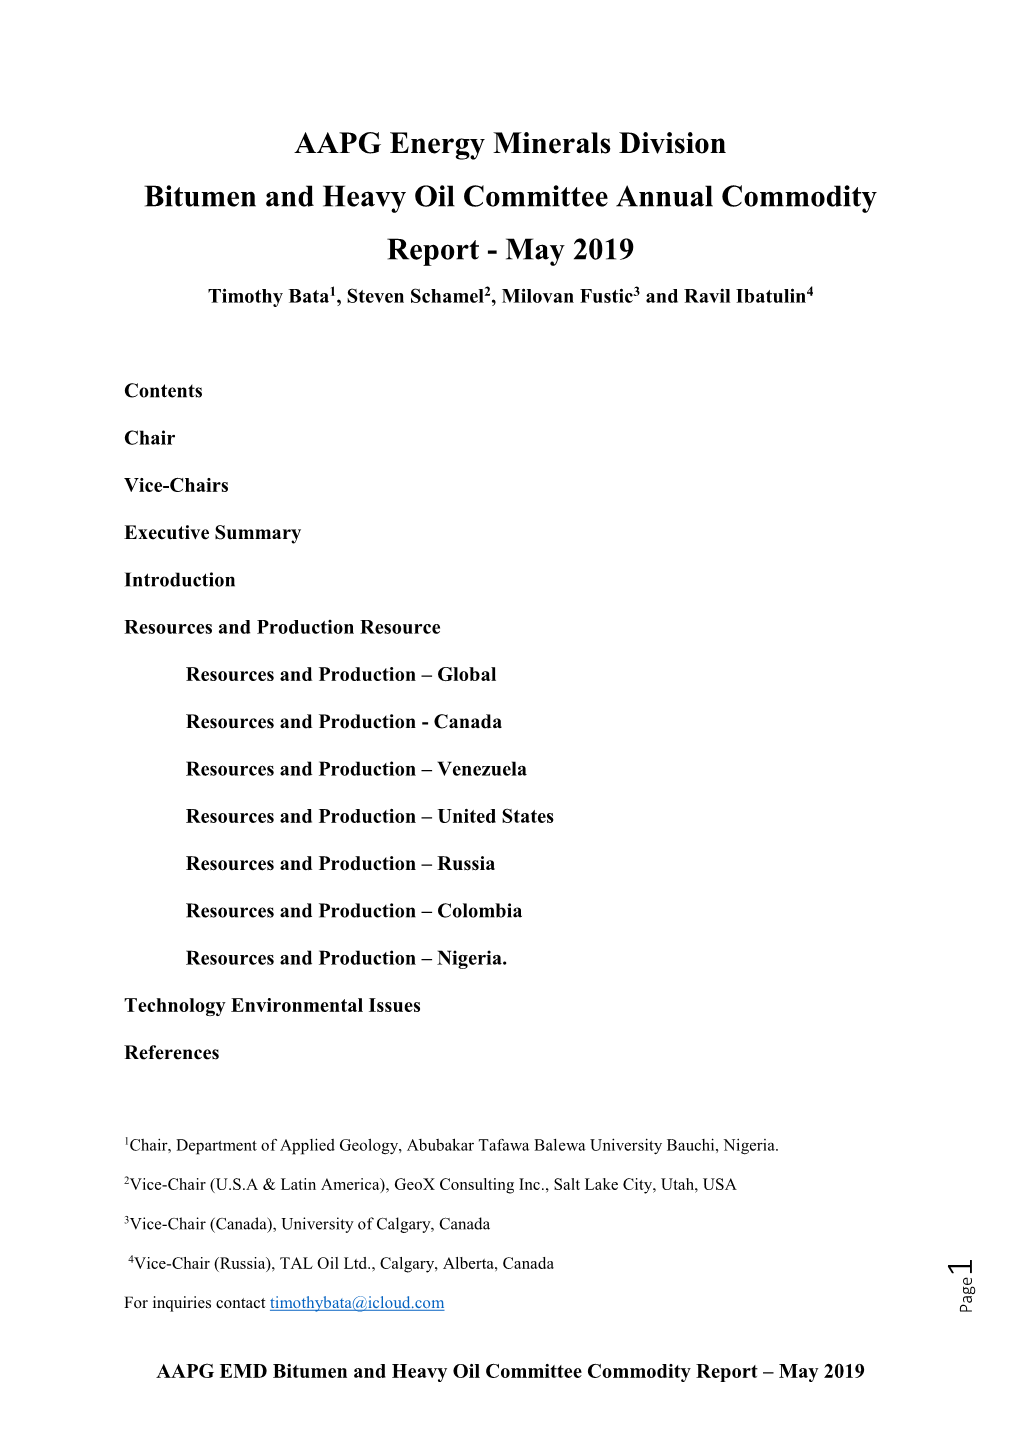 AAPG Energy Minerals Division Bitumen and Heavy Oil Committee Annual Commodity Report - May 2019